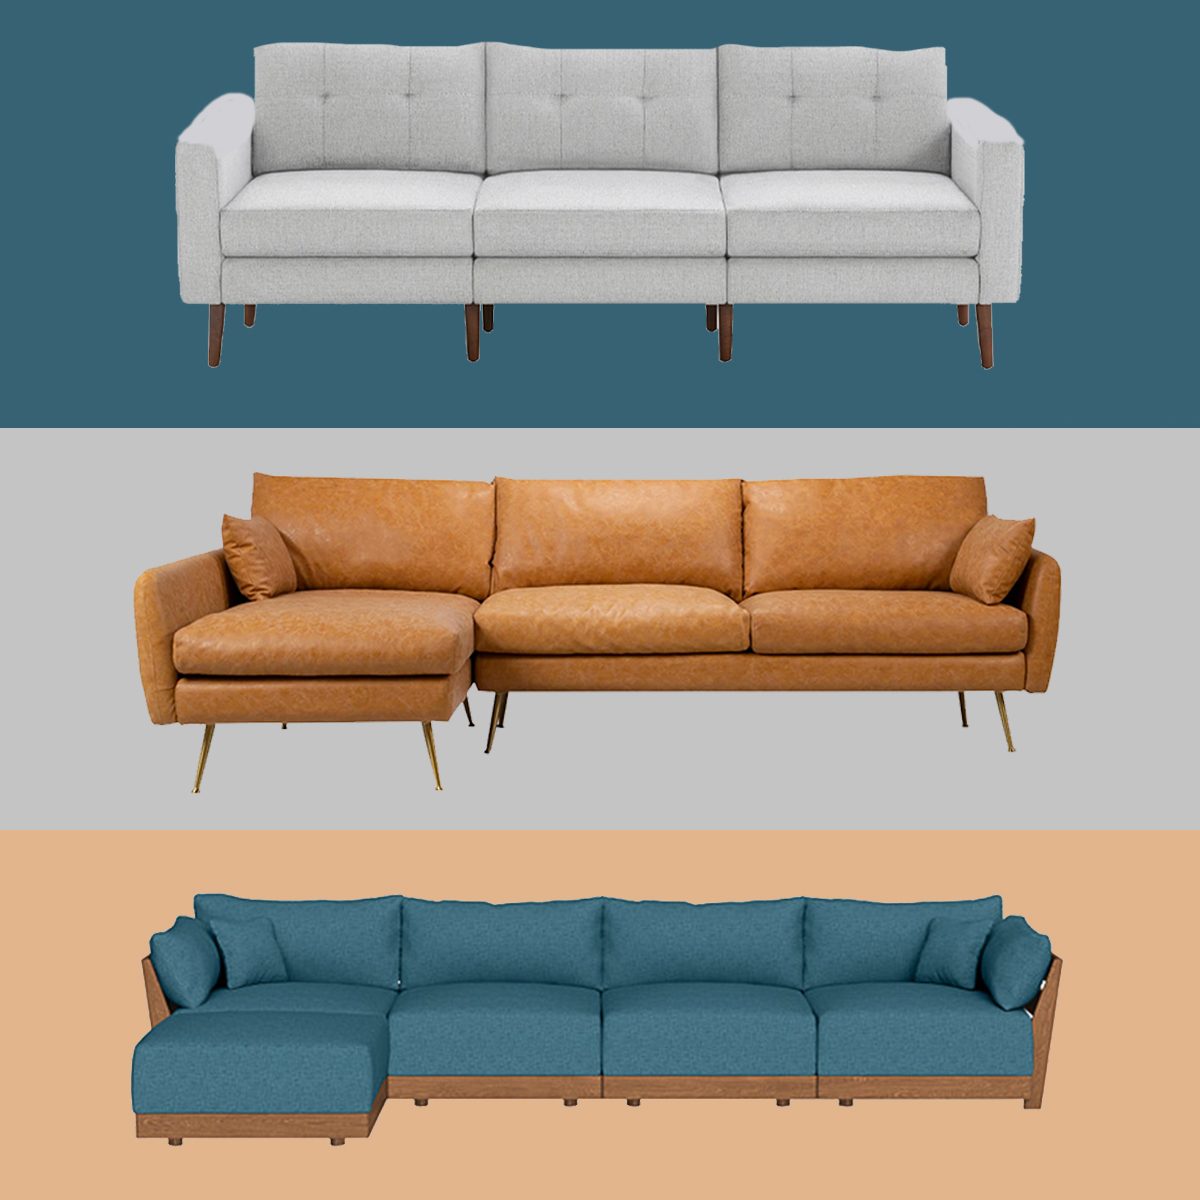 8 Best Sofas In A Box